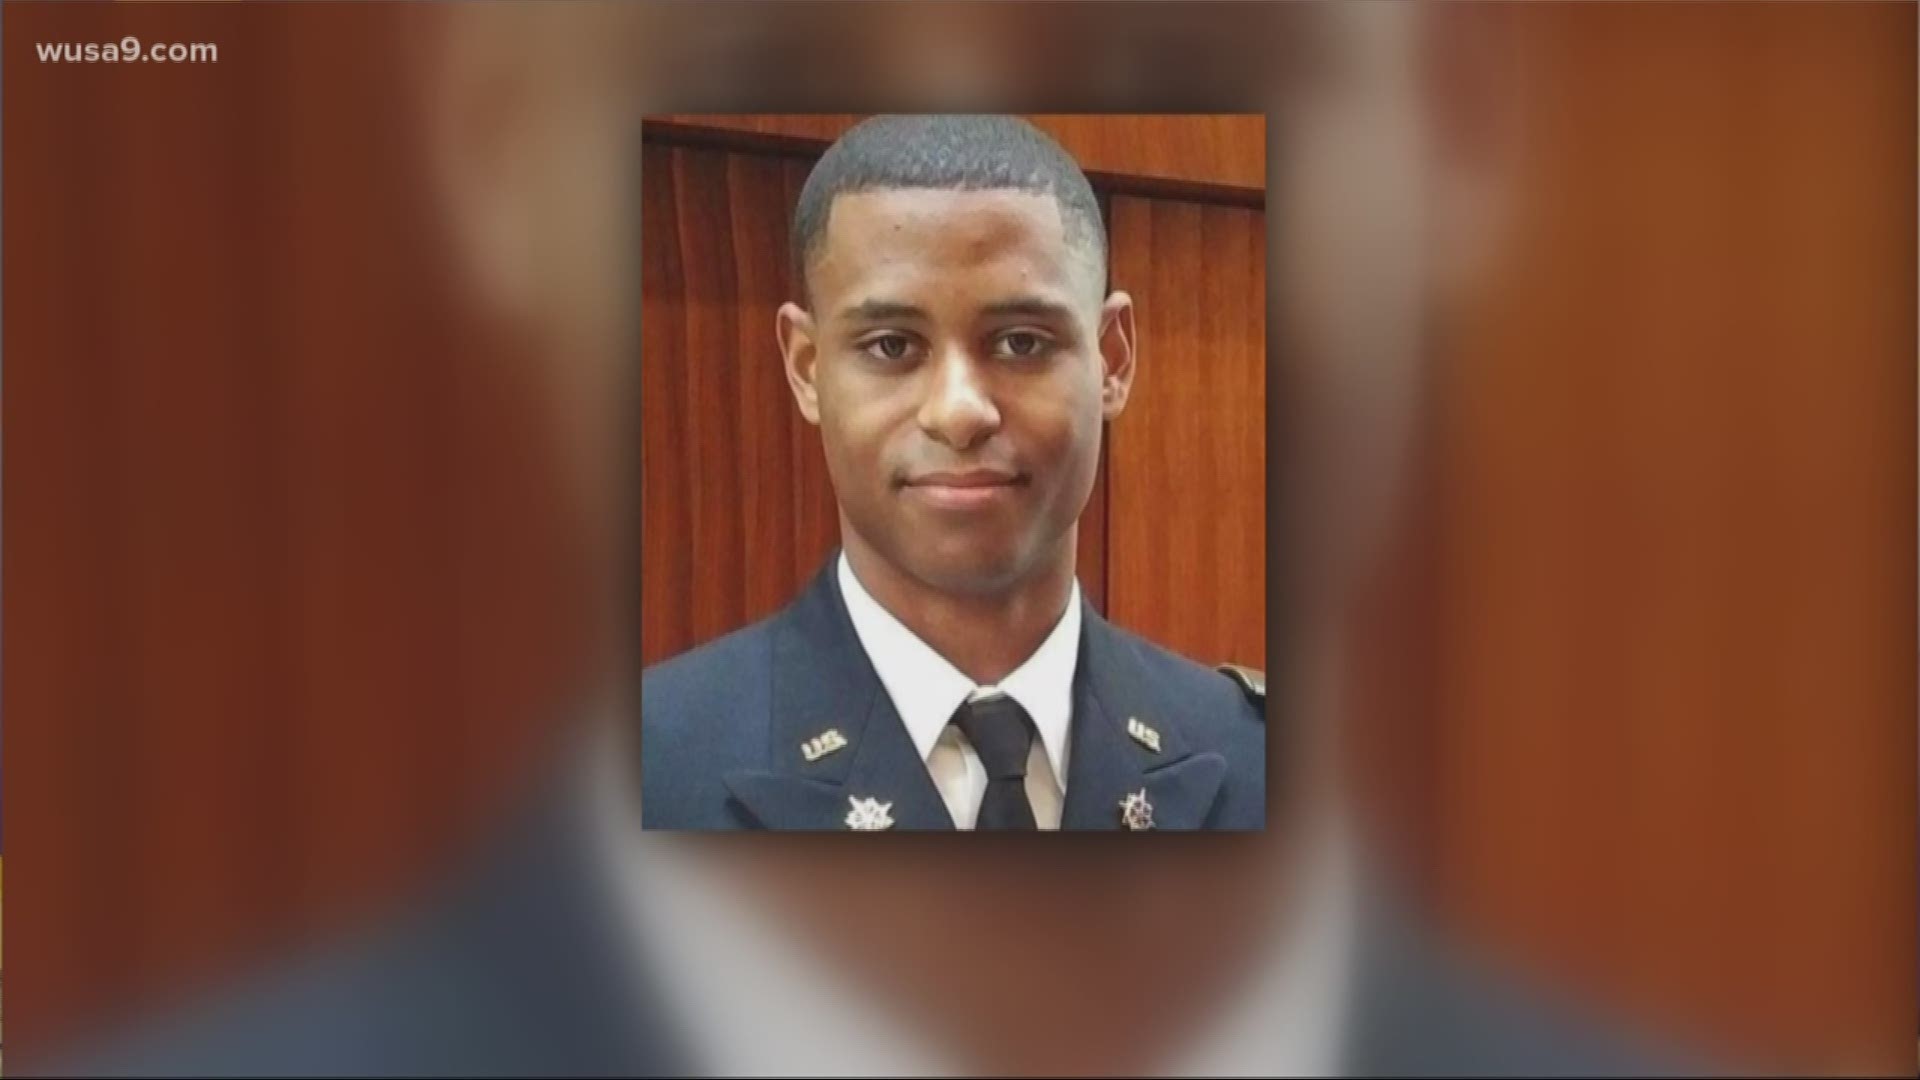 More than two years after newly commissioned U.S. army lieutenant Richard Collins was killed in College Park his family is trying to correct what they say is another injustice.